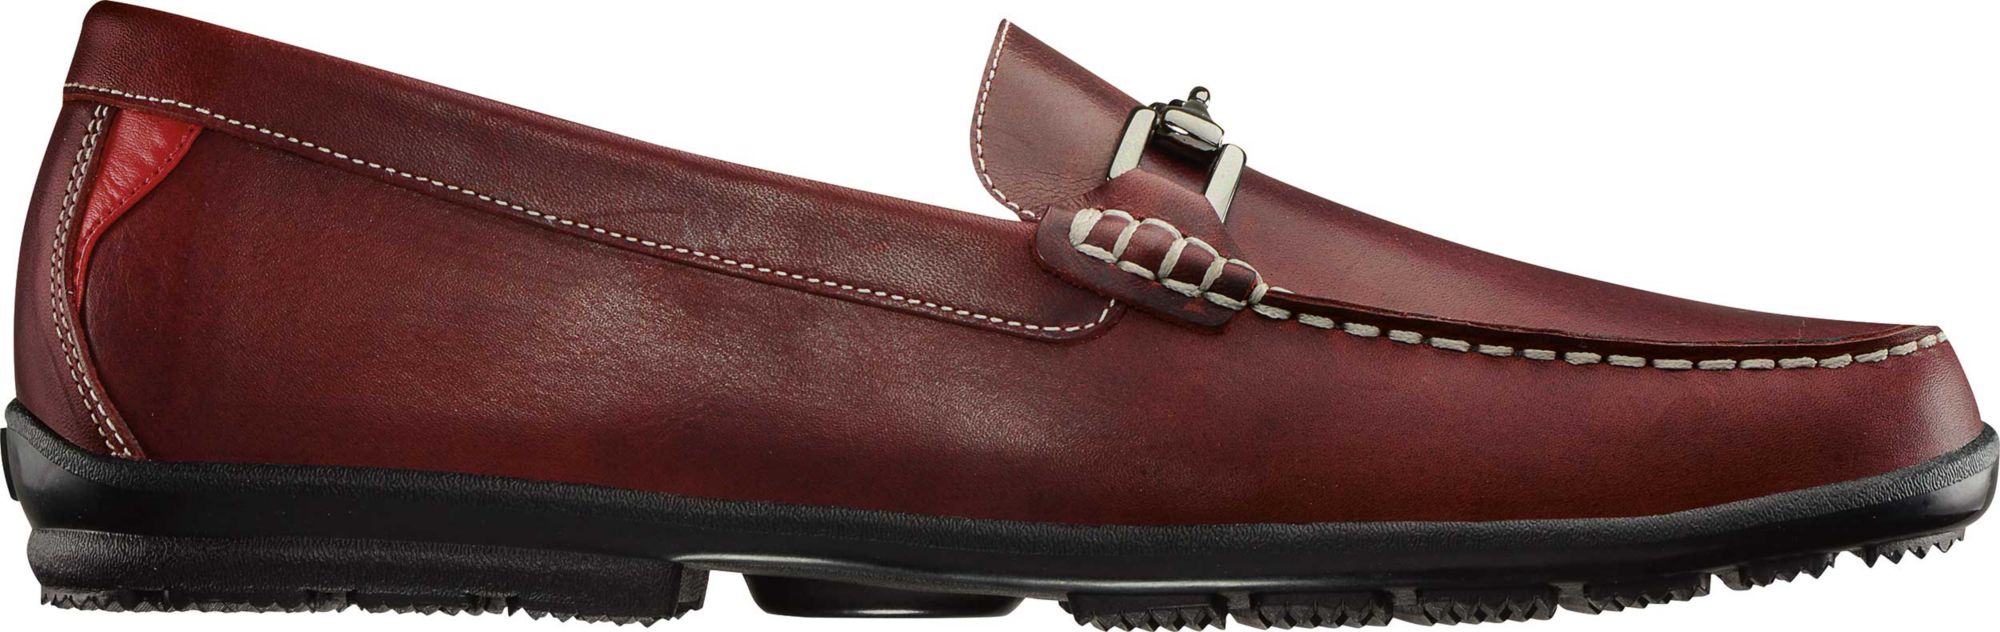 footjoy country club casual shoes